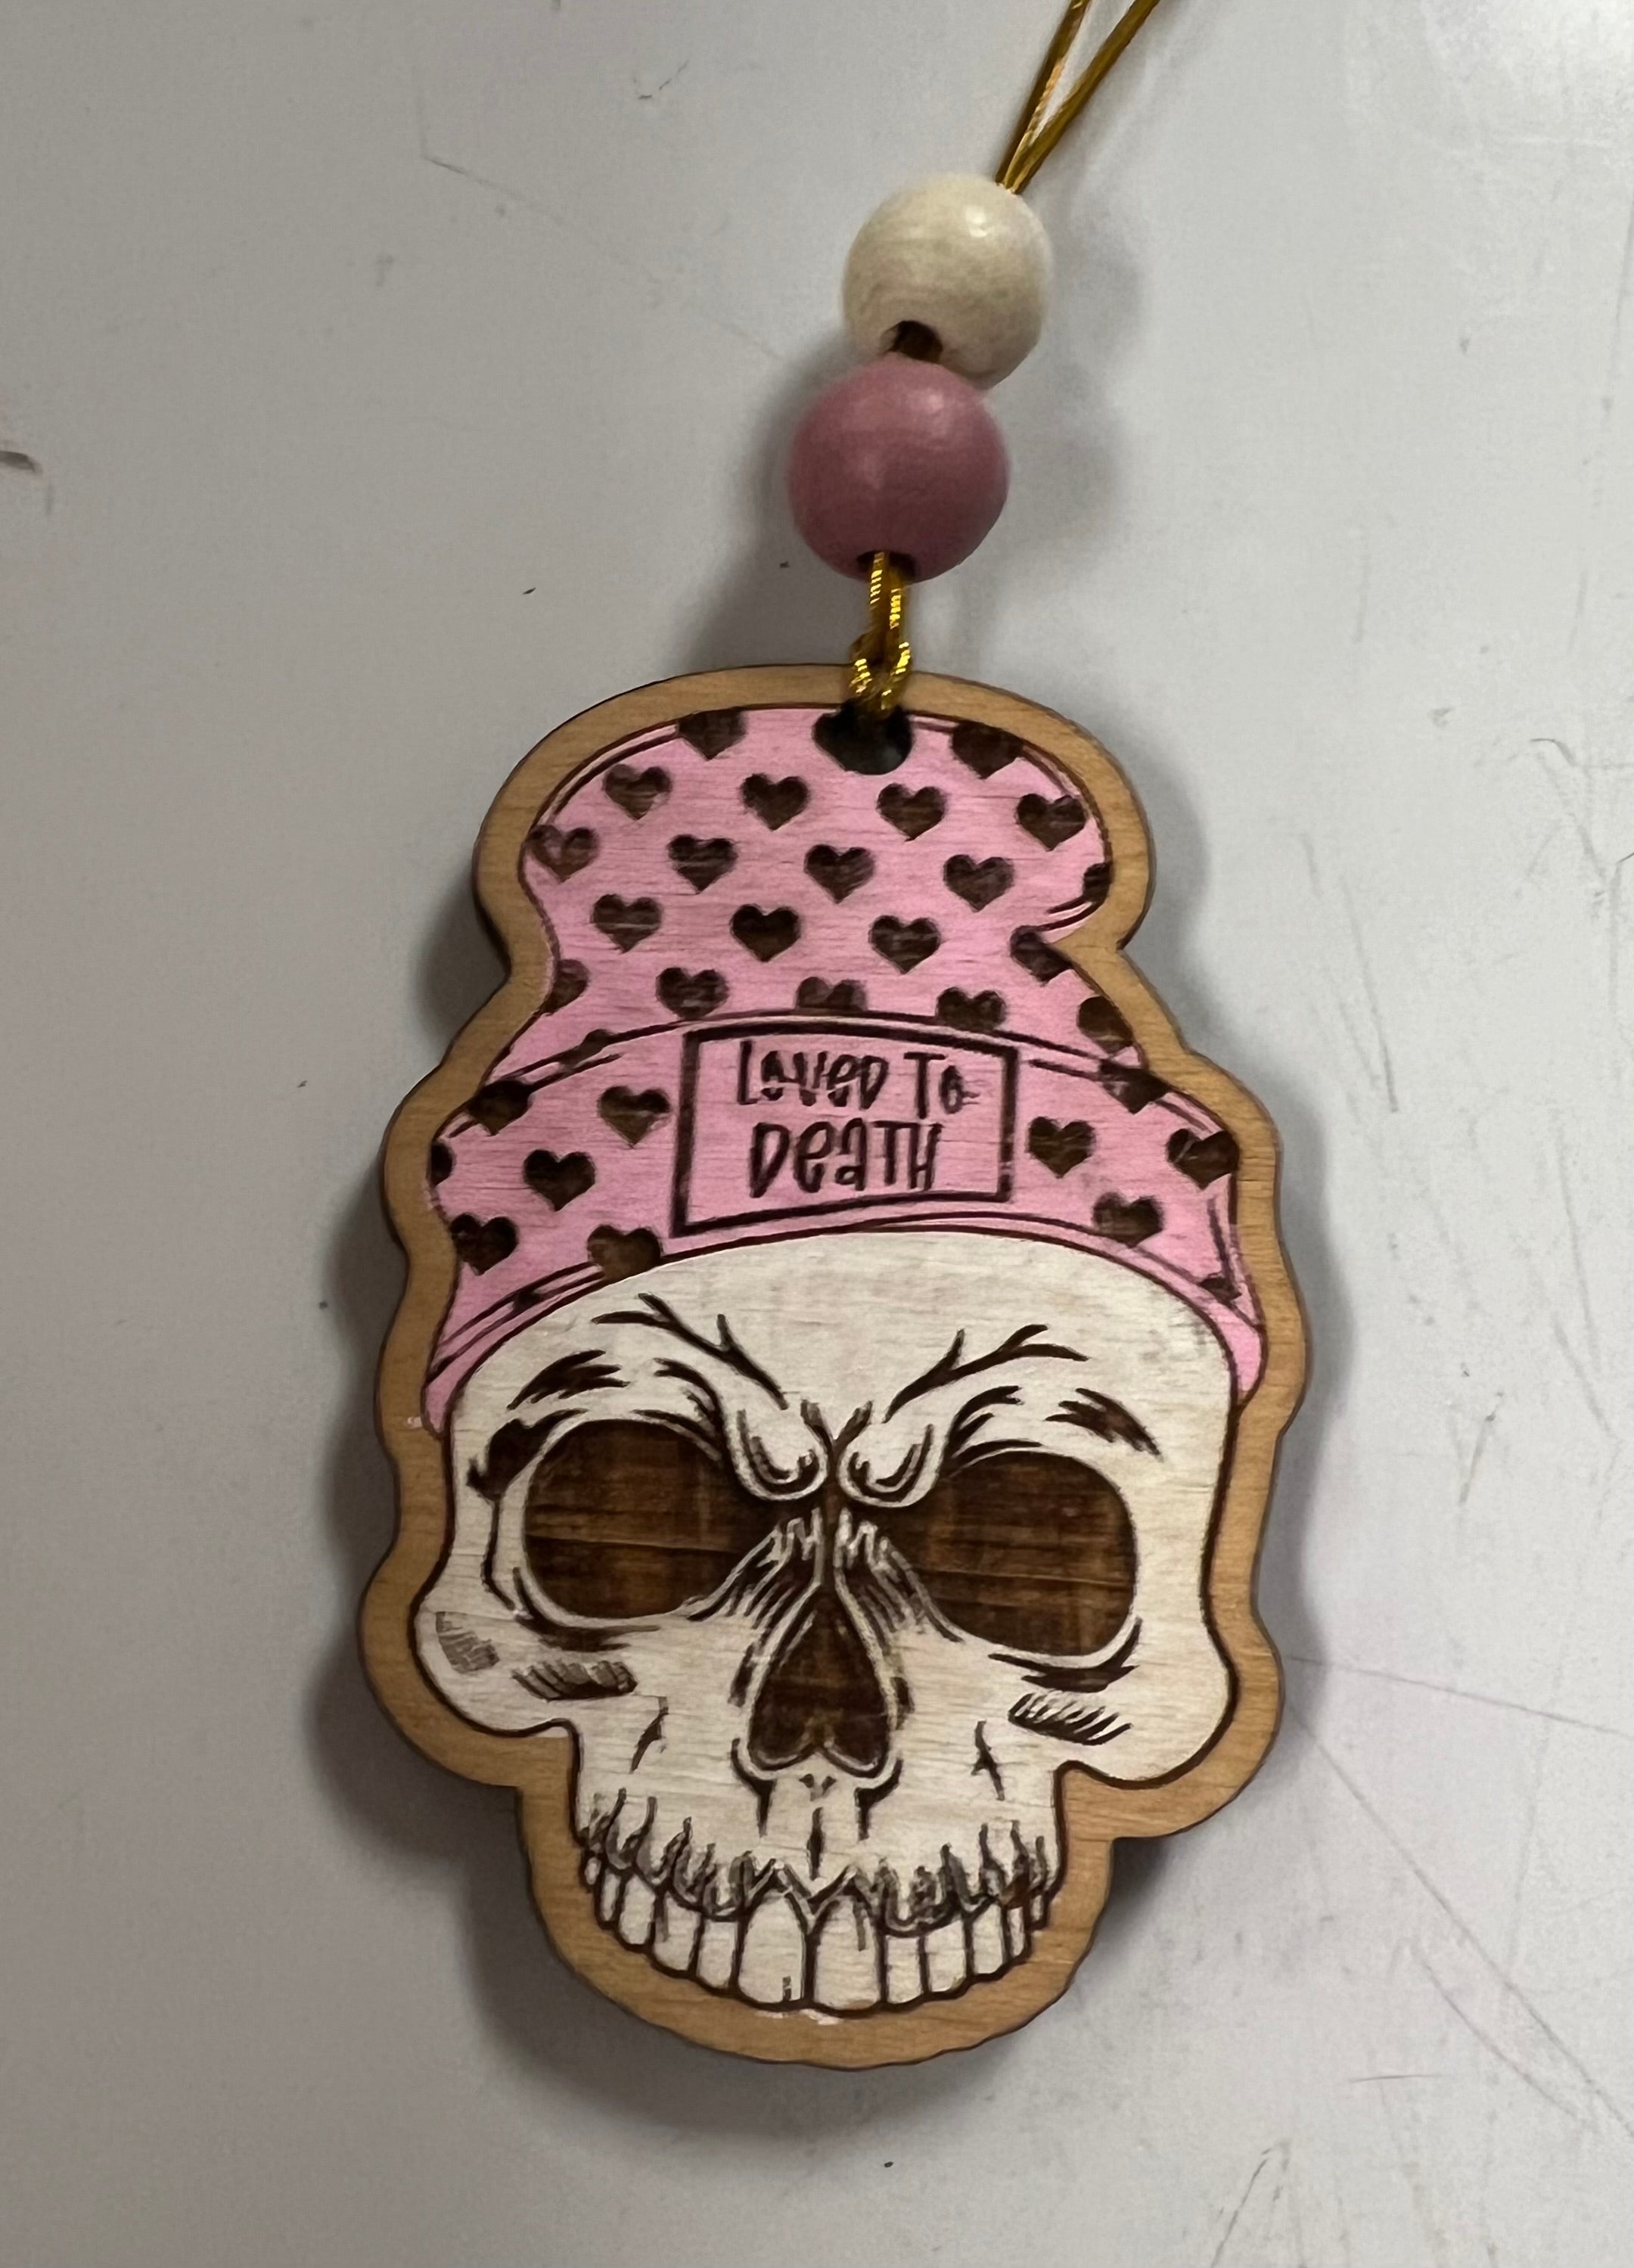 Loved to Death Ornament